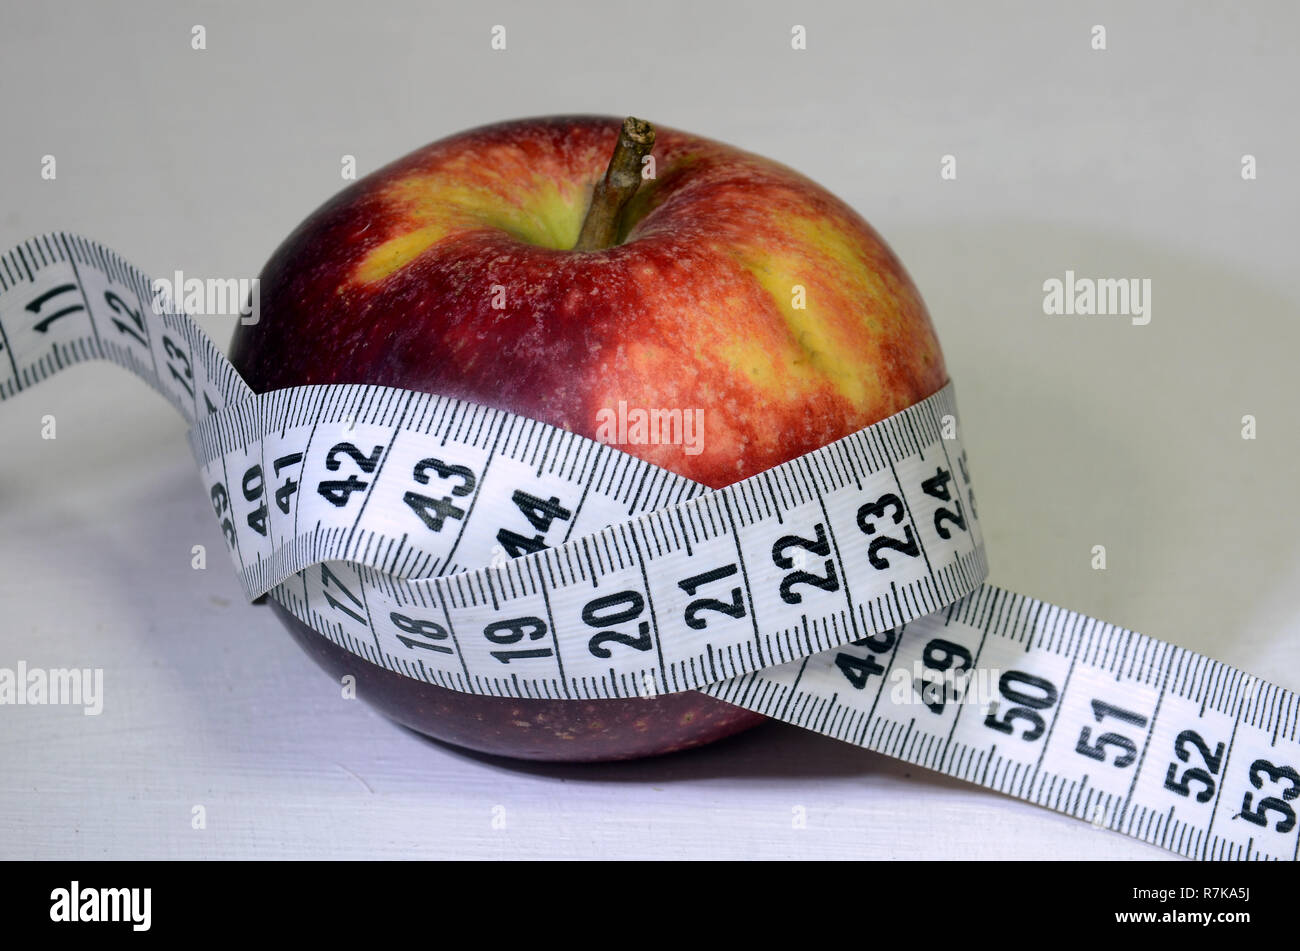 Red apple with measuring band. Stock Photo